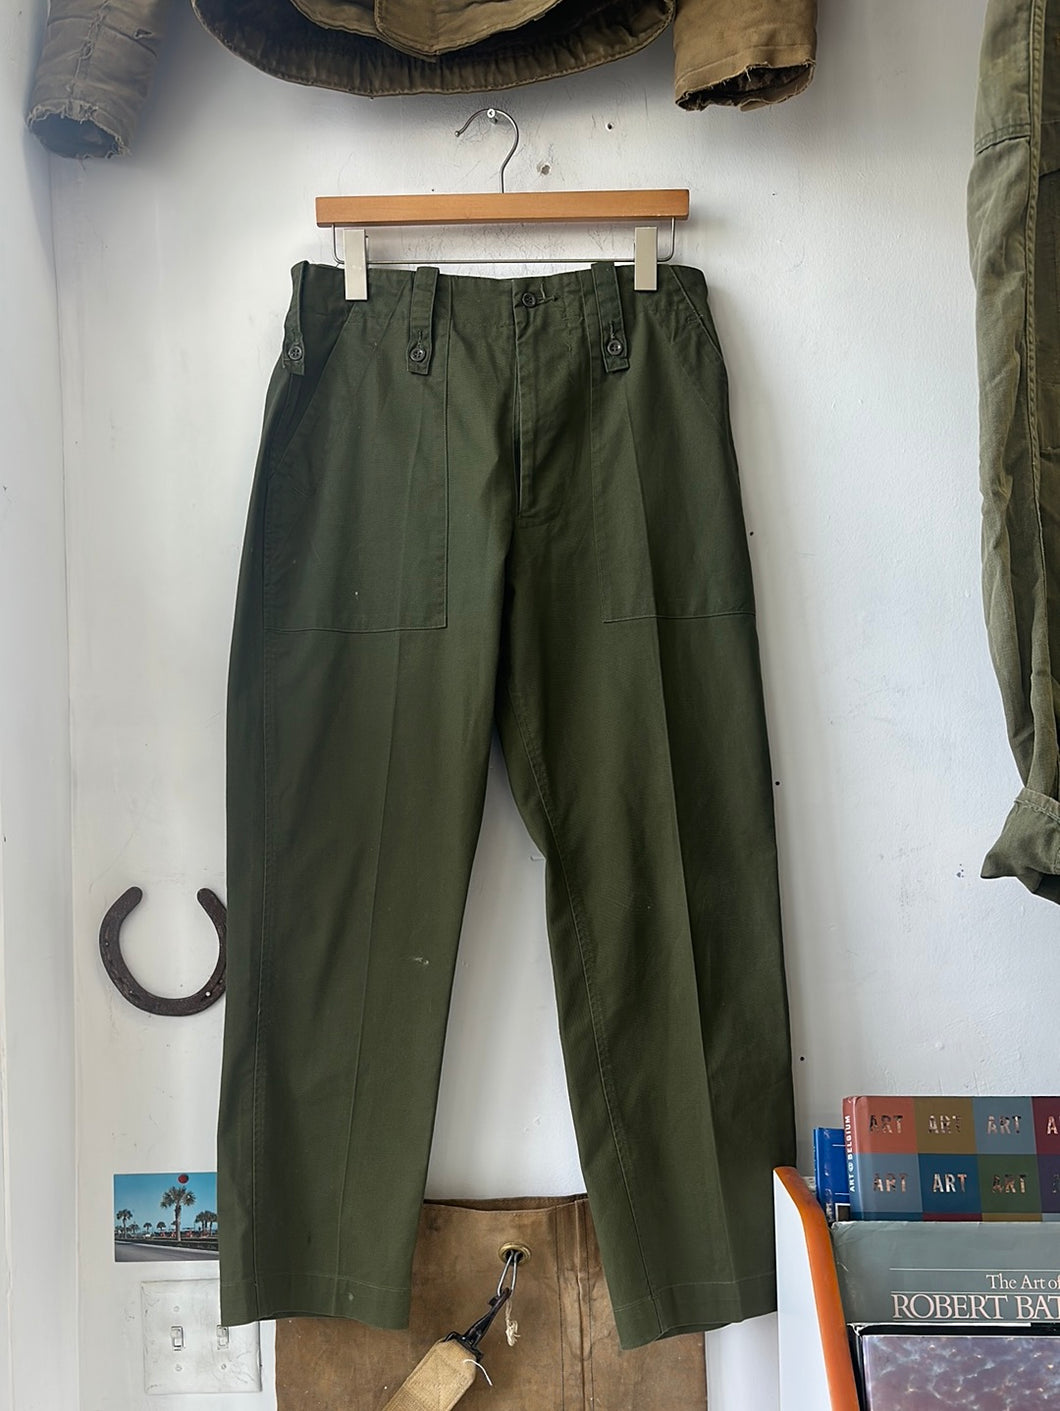 1980s/'90s British Military Lightweight Trousers